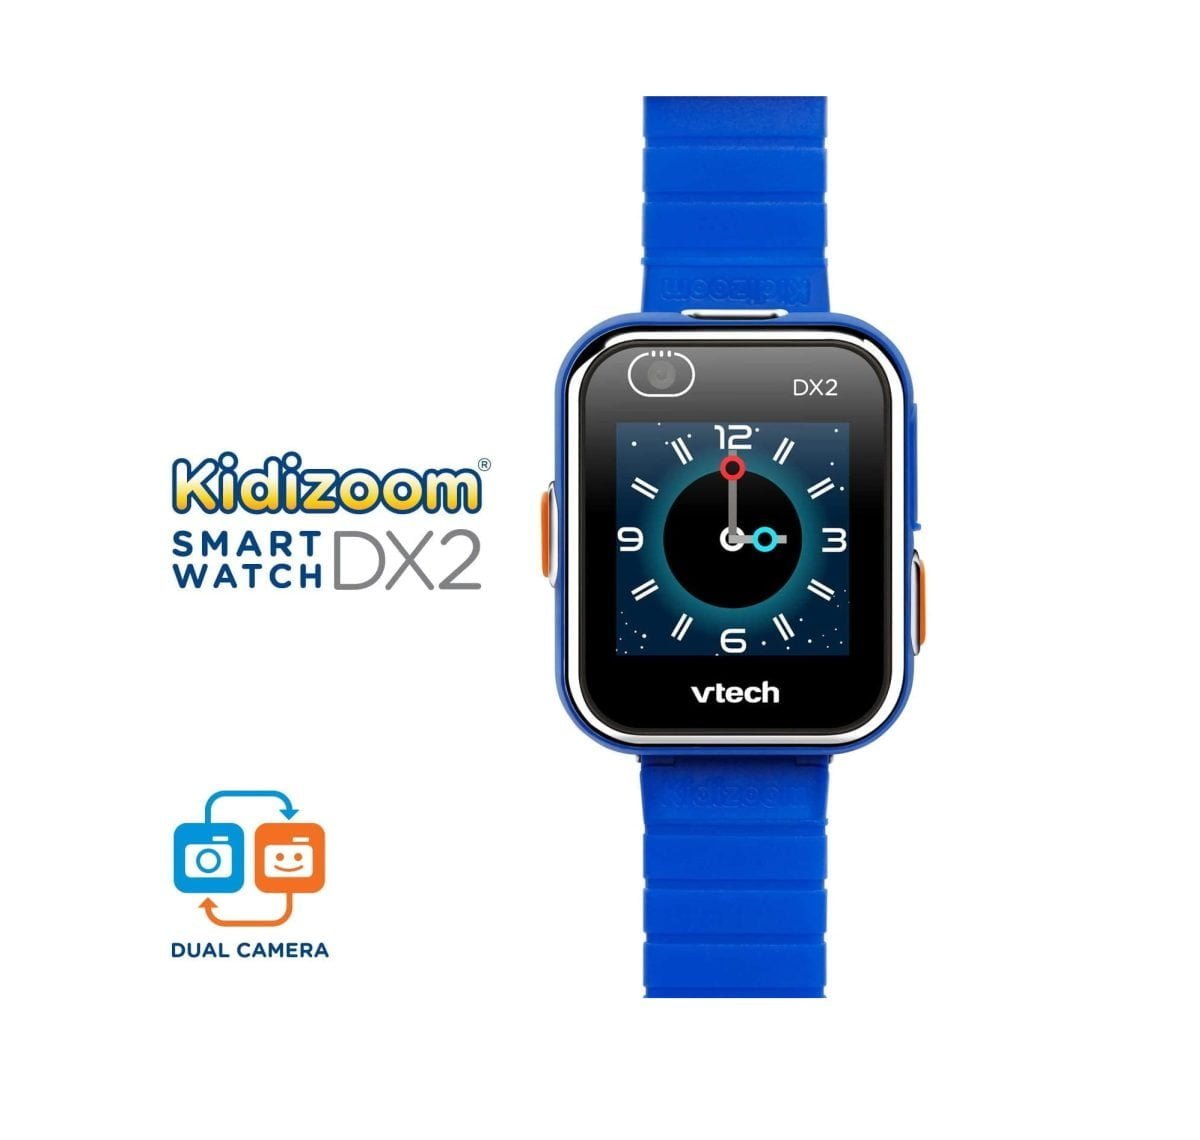 71Qajgdqi2L. Ac Sl1500 Kidizoom &Lt;H1&Gt;Vtech Kidizoom Smartwatch Dx2, Blue, 80-193800&Lt;/H1&Gt; &Lt;Ul Class=&Quot;A-Unordered-List A-Vertical A-Spacing-Mini&Quot;&Gt; &Lt;Li&Gt;&Lt;Span Class=&Quot;A-List-Item&Quot;&Gt; Two Cameras Allow You To Take Video And Selfies That Can Be Customized And Made Into New Watch Faces &Lt;/Span&Gt;&Lt;/Li&Gt; &Lt;Li&Gt;&Lt;Span Class=&Quot;A-List-Item&Quot;&Gt; Helps Kids Learn To Tell Time And Has 55 Digital And Analog Clock Faces That They Can Customize &Lt;/Span&Gt;&Lt;/Li&Gt; &Lt;Li&Gt;&Lt;Span Class=&Quot;A-List-Item&Quot;&Gt; New Monster Catcher Game Creates An Augmented Reality Gaming Experience Where You Can Capture Monsters In The Real World &Lt;/Span&Gt;&Lt;/Li&Gt; &Lt;Li&Gt;&Lt;Span Class=&Quot;A-List-Item&Quot;&Gt; Includes A Motion Sensor For Active Play Challenges And A Pedometer &Lt;/Span&Gt;&Lt;/Li&Gt; &Lt;Li&Gt;&Lt;Span Class=&Quot;A-List-Item&Quot;&Gt; Using The Included Micro-Usb Cable, Upload Photos And Videos, Recharge The Battery And Download Extra Free Content Like Games And Seasonal Clock Faces From Vtech'S Learning Lodge. Kidizoom Smartwatch Dx2 Is Intended For Ages 4 To 12 Years &Lt;/Span&Gt;&Lt;/Li&Gt; &Lt;Li&Gt;&Lt;Span Class=&Quot;A-List-Item&Quot;&Gt; Splash Proof For Everyday Play (Splash And Sweat Proof. Do Not Submerge And Not Suitable For Showering Or Bathing. &Lt;/Span&Gt;&Lt;/Li&Gt; &Lt;/Ul&Gt; Smartwatch Vtech Kidizoom Smartwatch Dx2, Blue, 80-193800